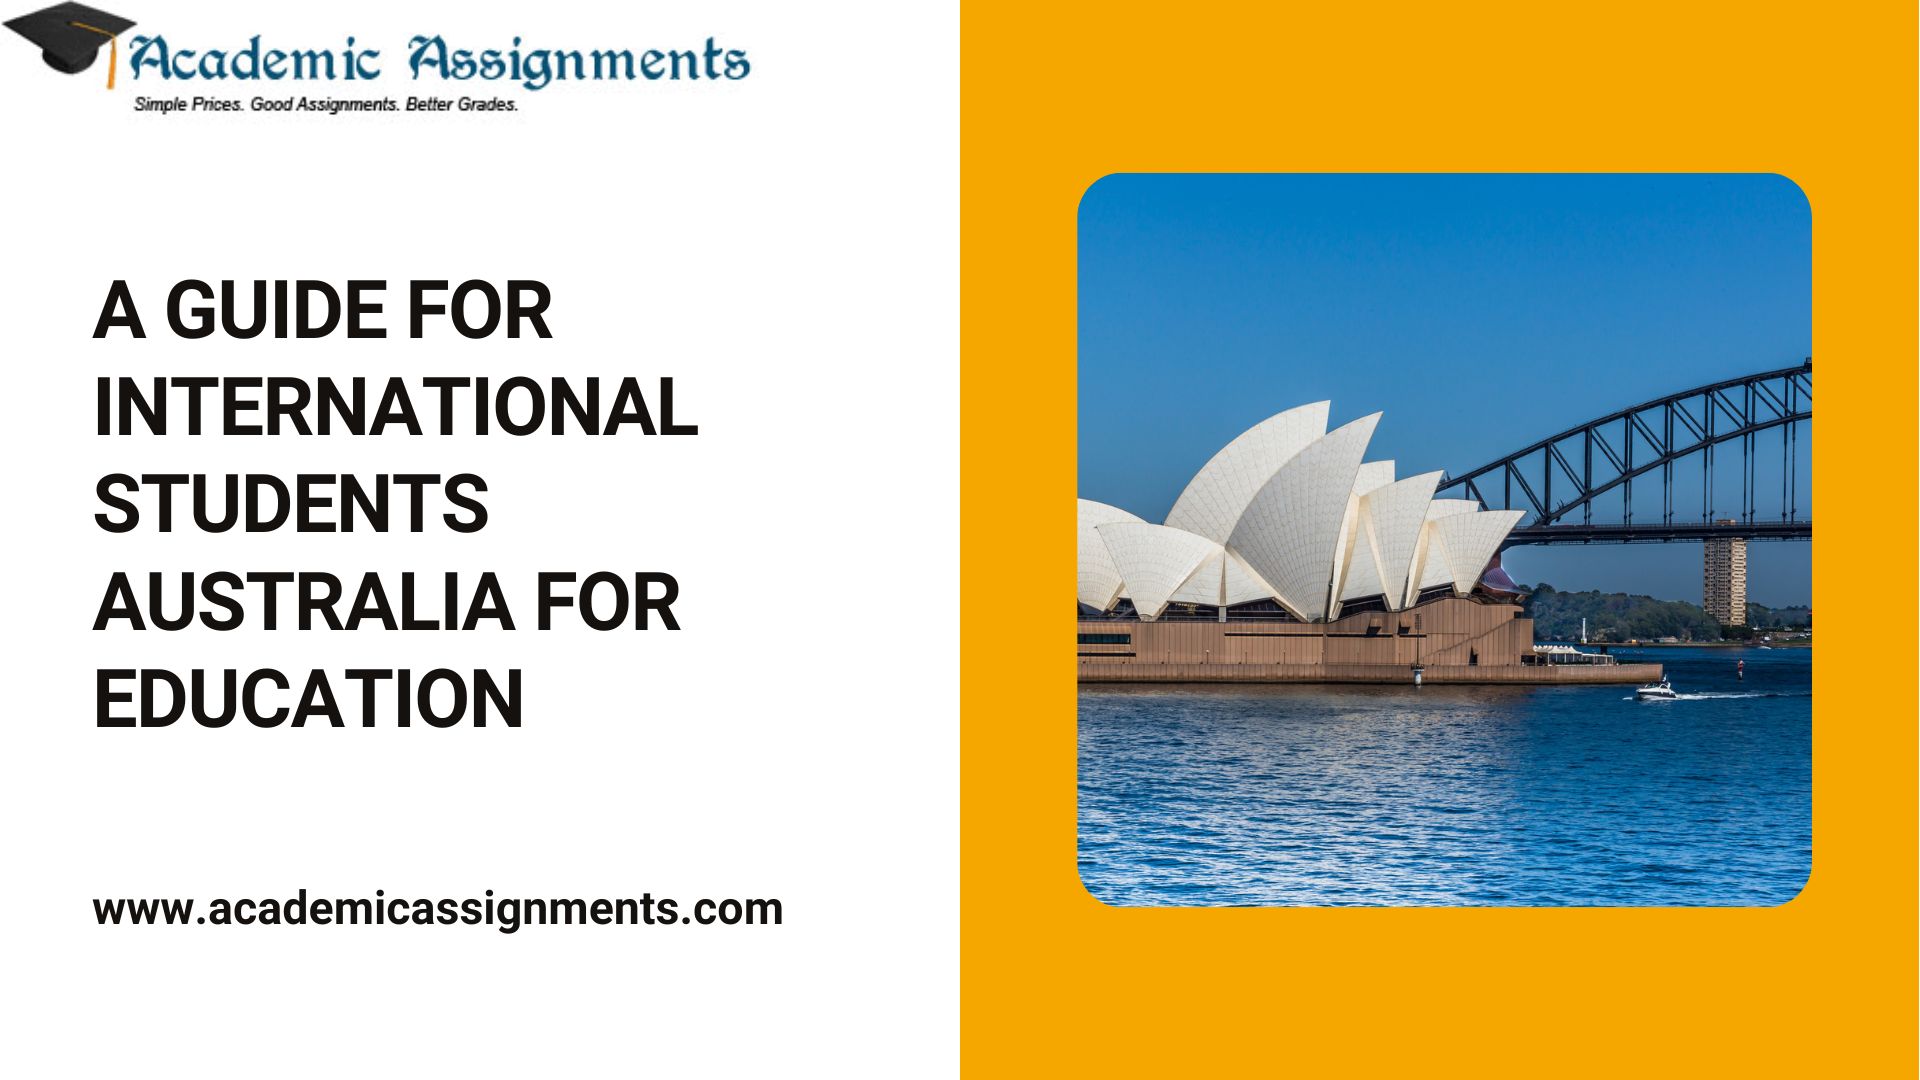 A GUIDE FOR INTERNATIONAL STUDENTS AUSTRALIA FOR EDUCATION